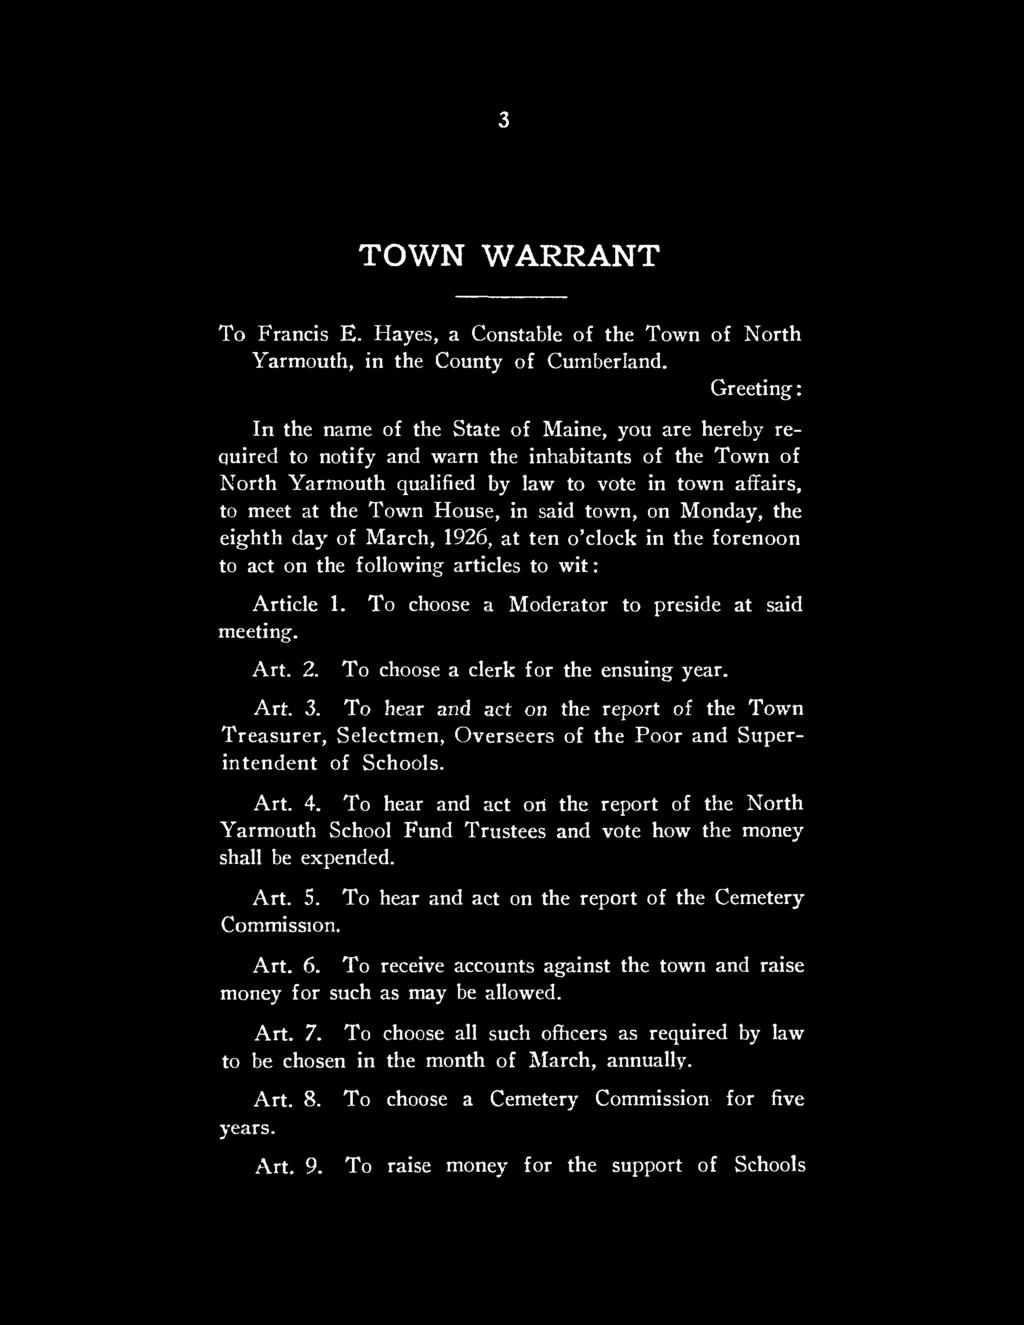 3 TOWN WARRANT To Francis E. Hayes, a Constable of the Town of North Yarmouth, in the County of Cumberland.